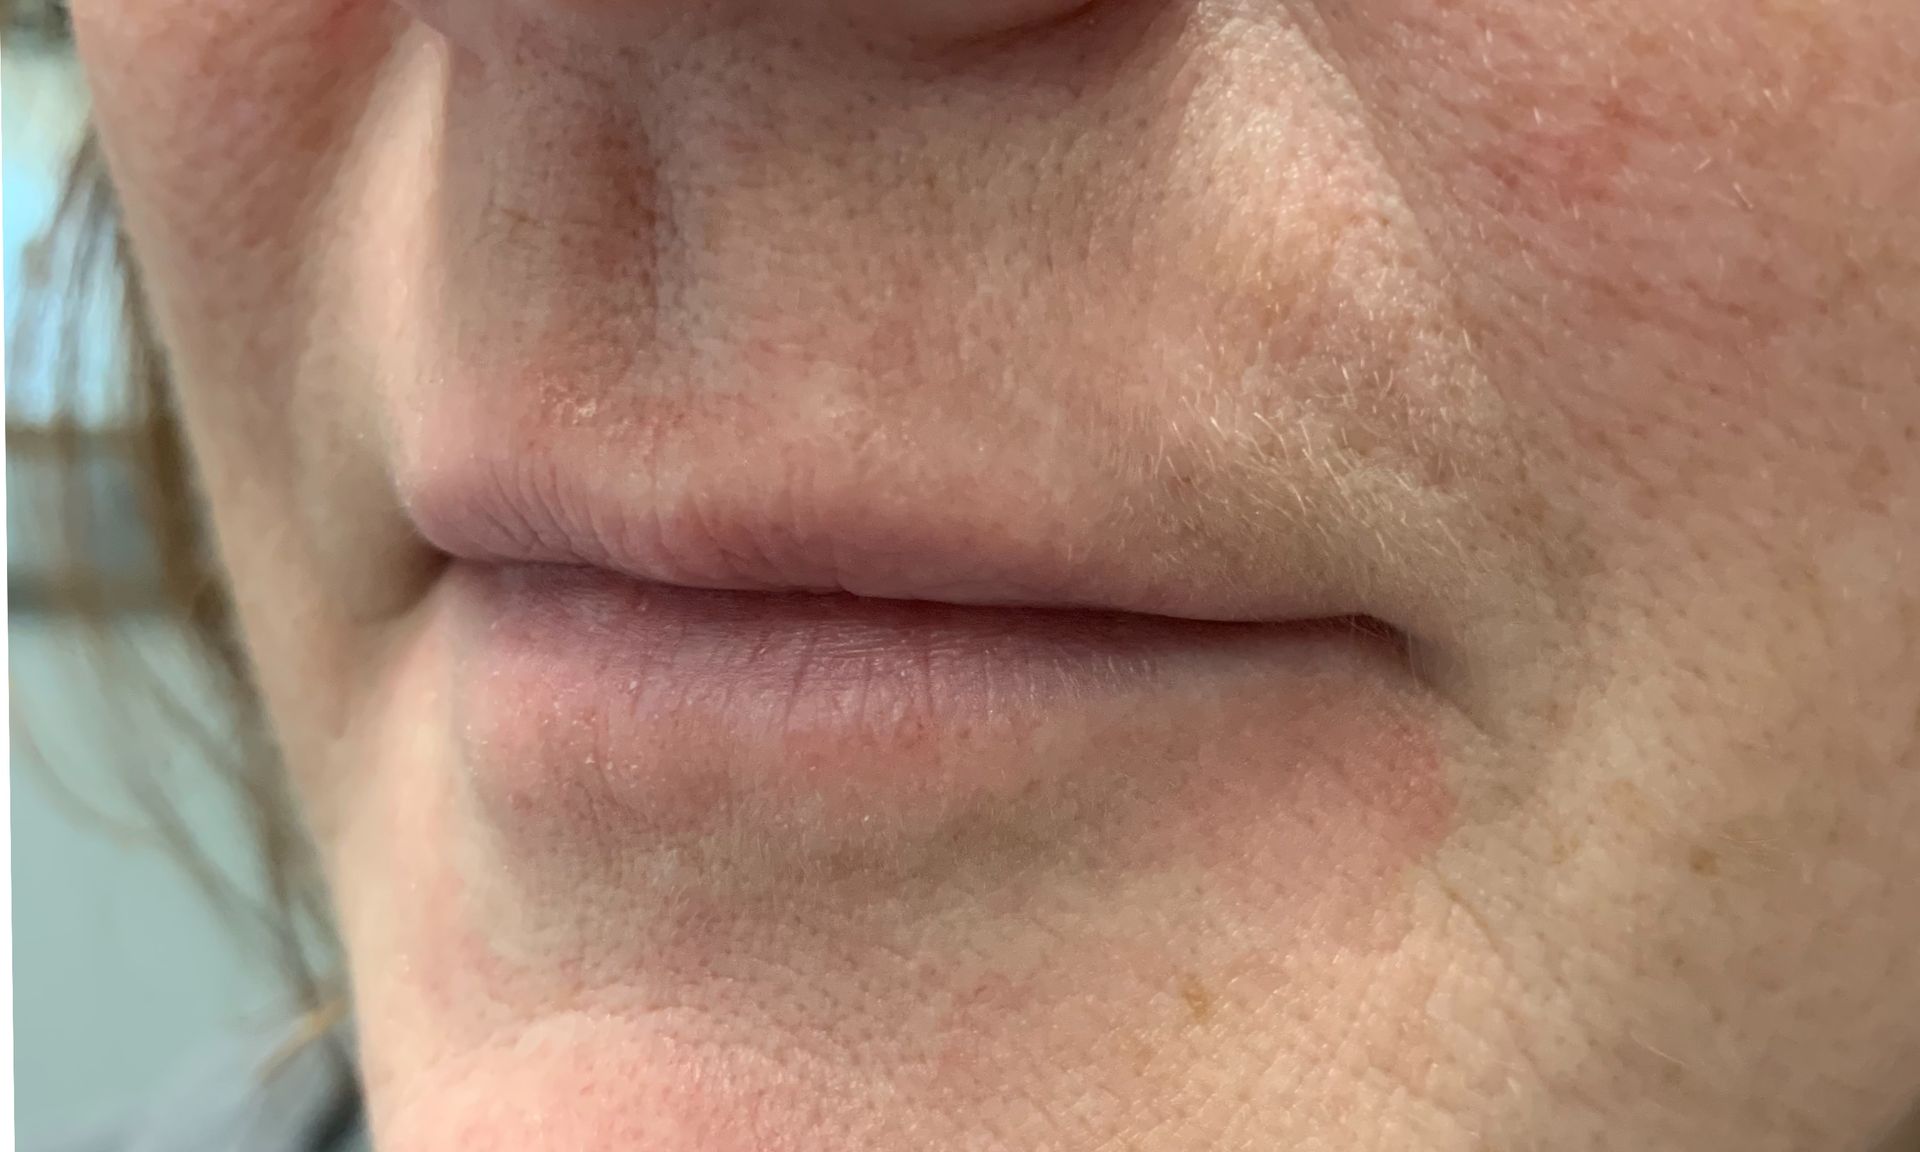 A close up of a woman 's lips and nose.